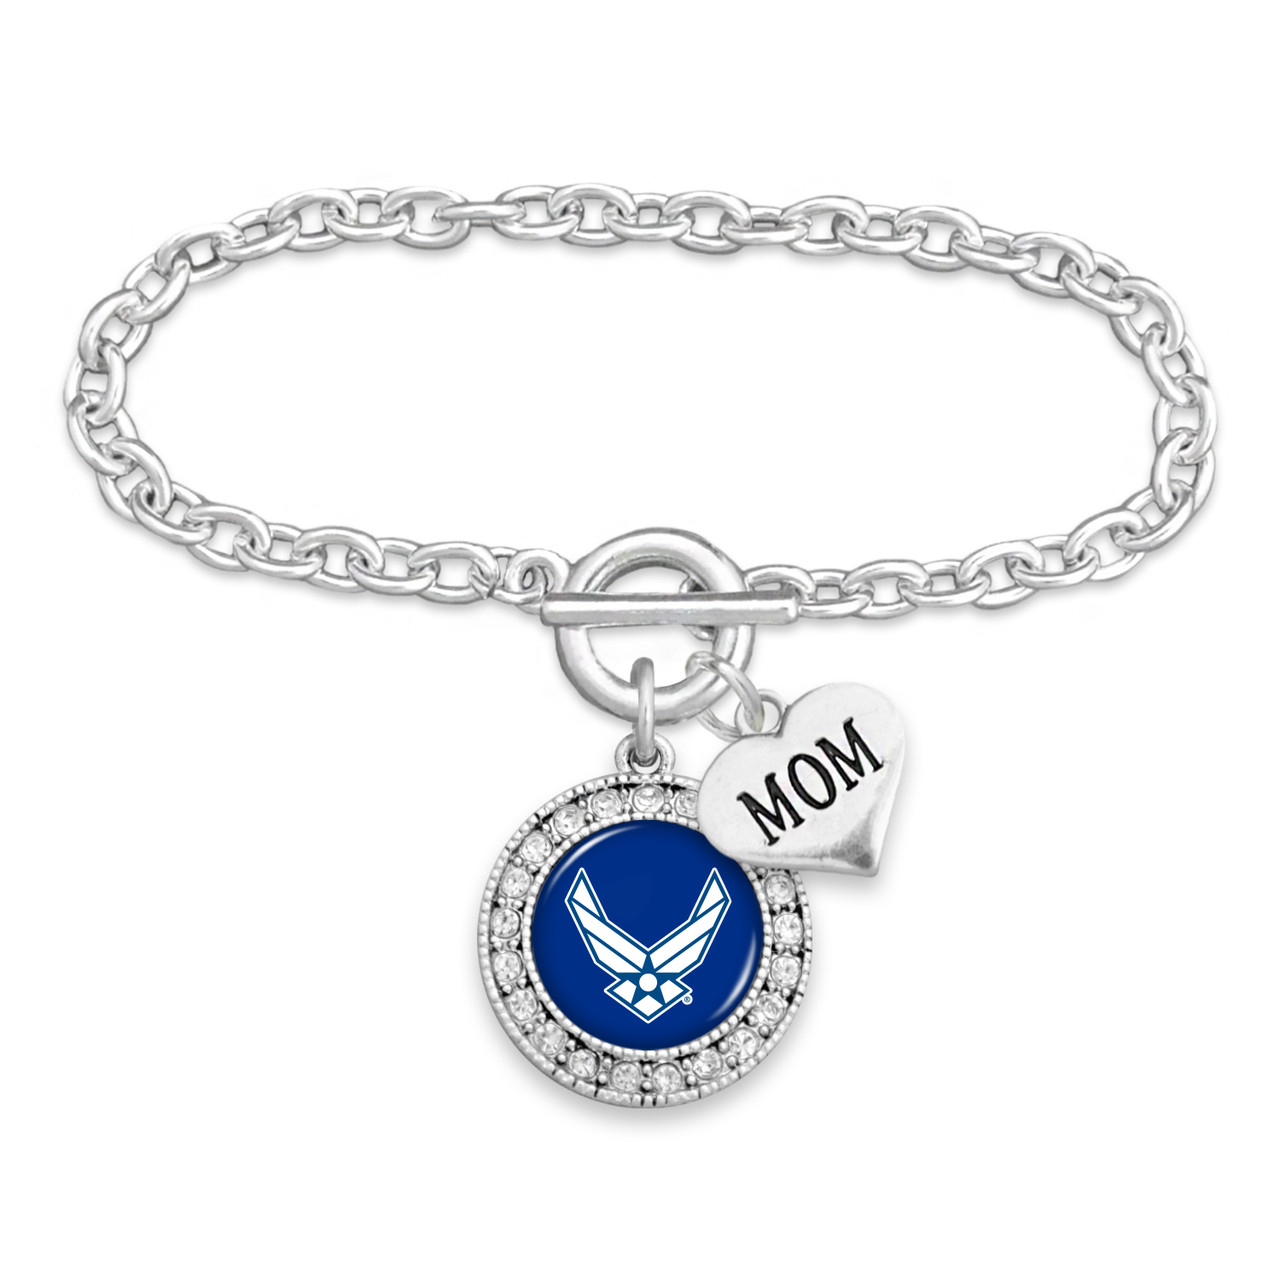 Military Bracelet - Air Force - Round Crystal with Mom Accent Charm